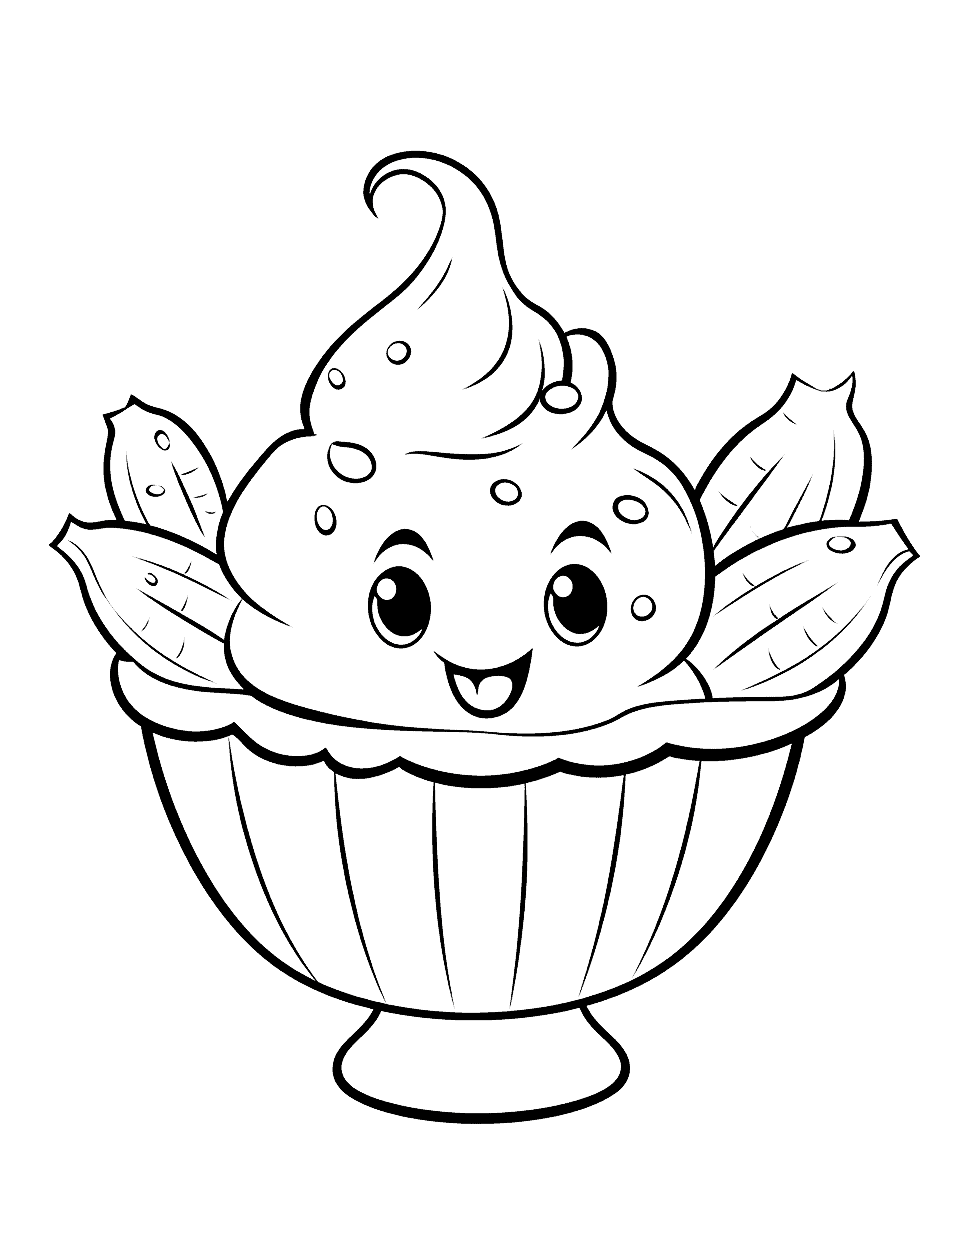 Adorable Banana Split Ice Cream Coloring Page - Irresistibly cute banana split with googly eyes and a big smile.